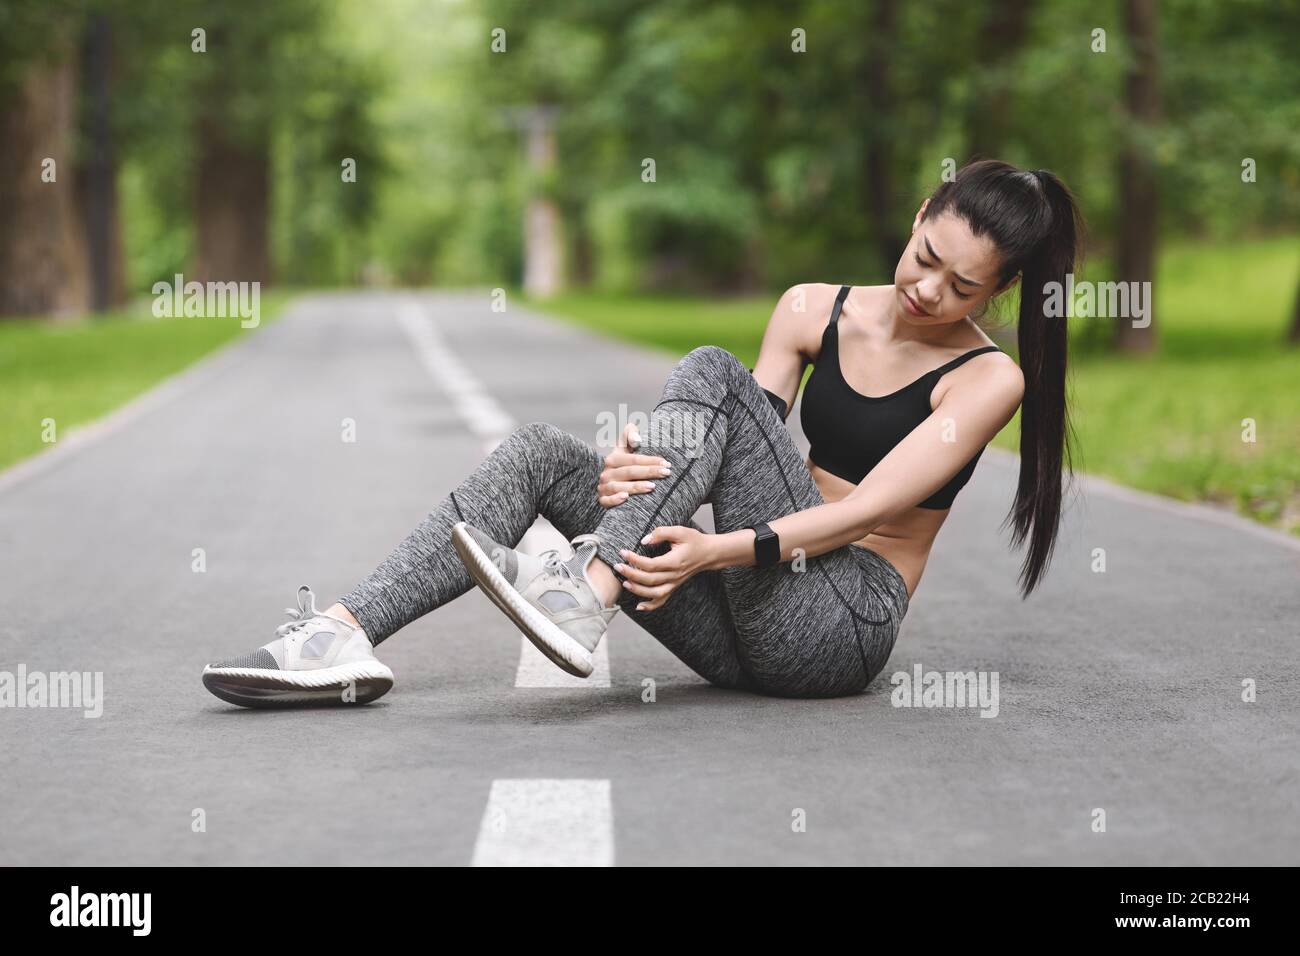 Sports Injury. Asian Girl Suffering From Ankle Pain After Jogging In Park Stock Photo